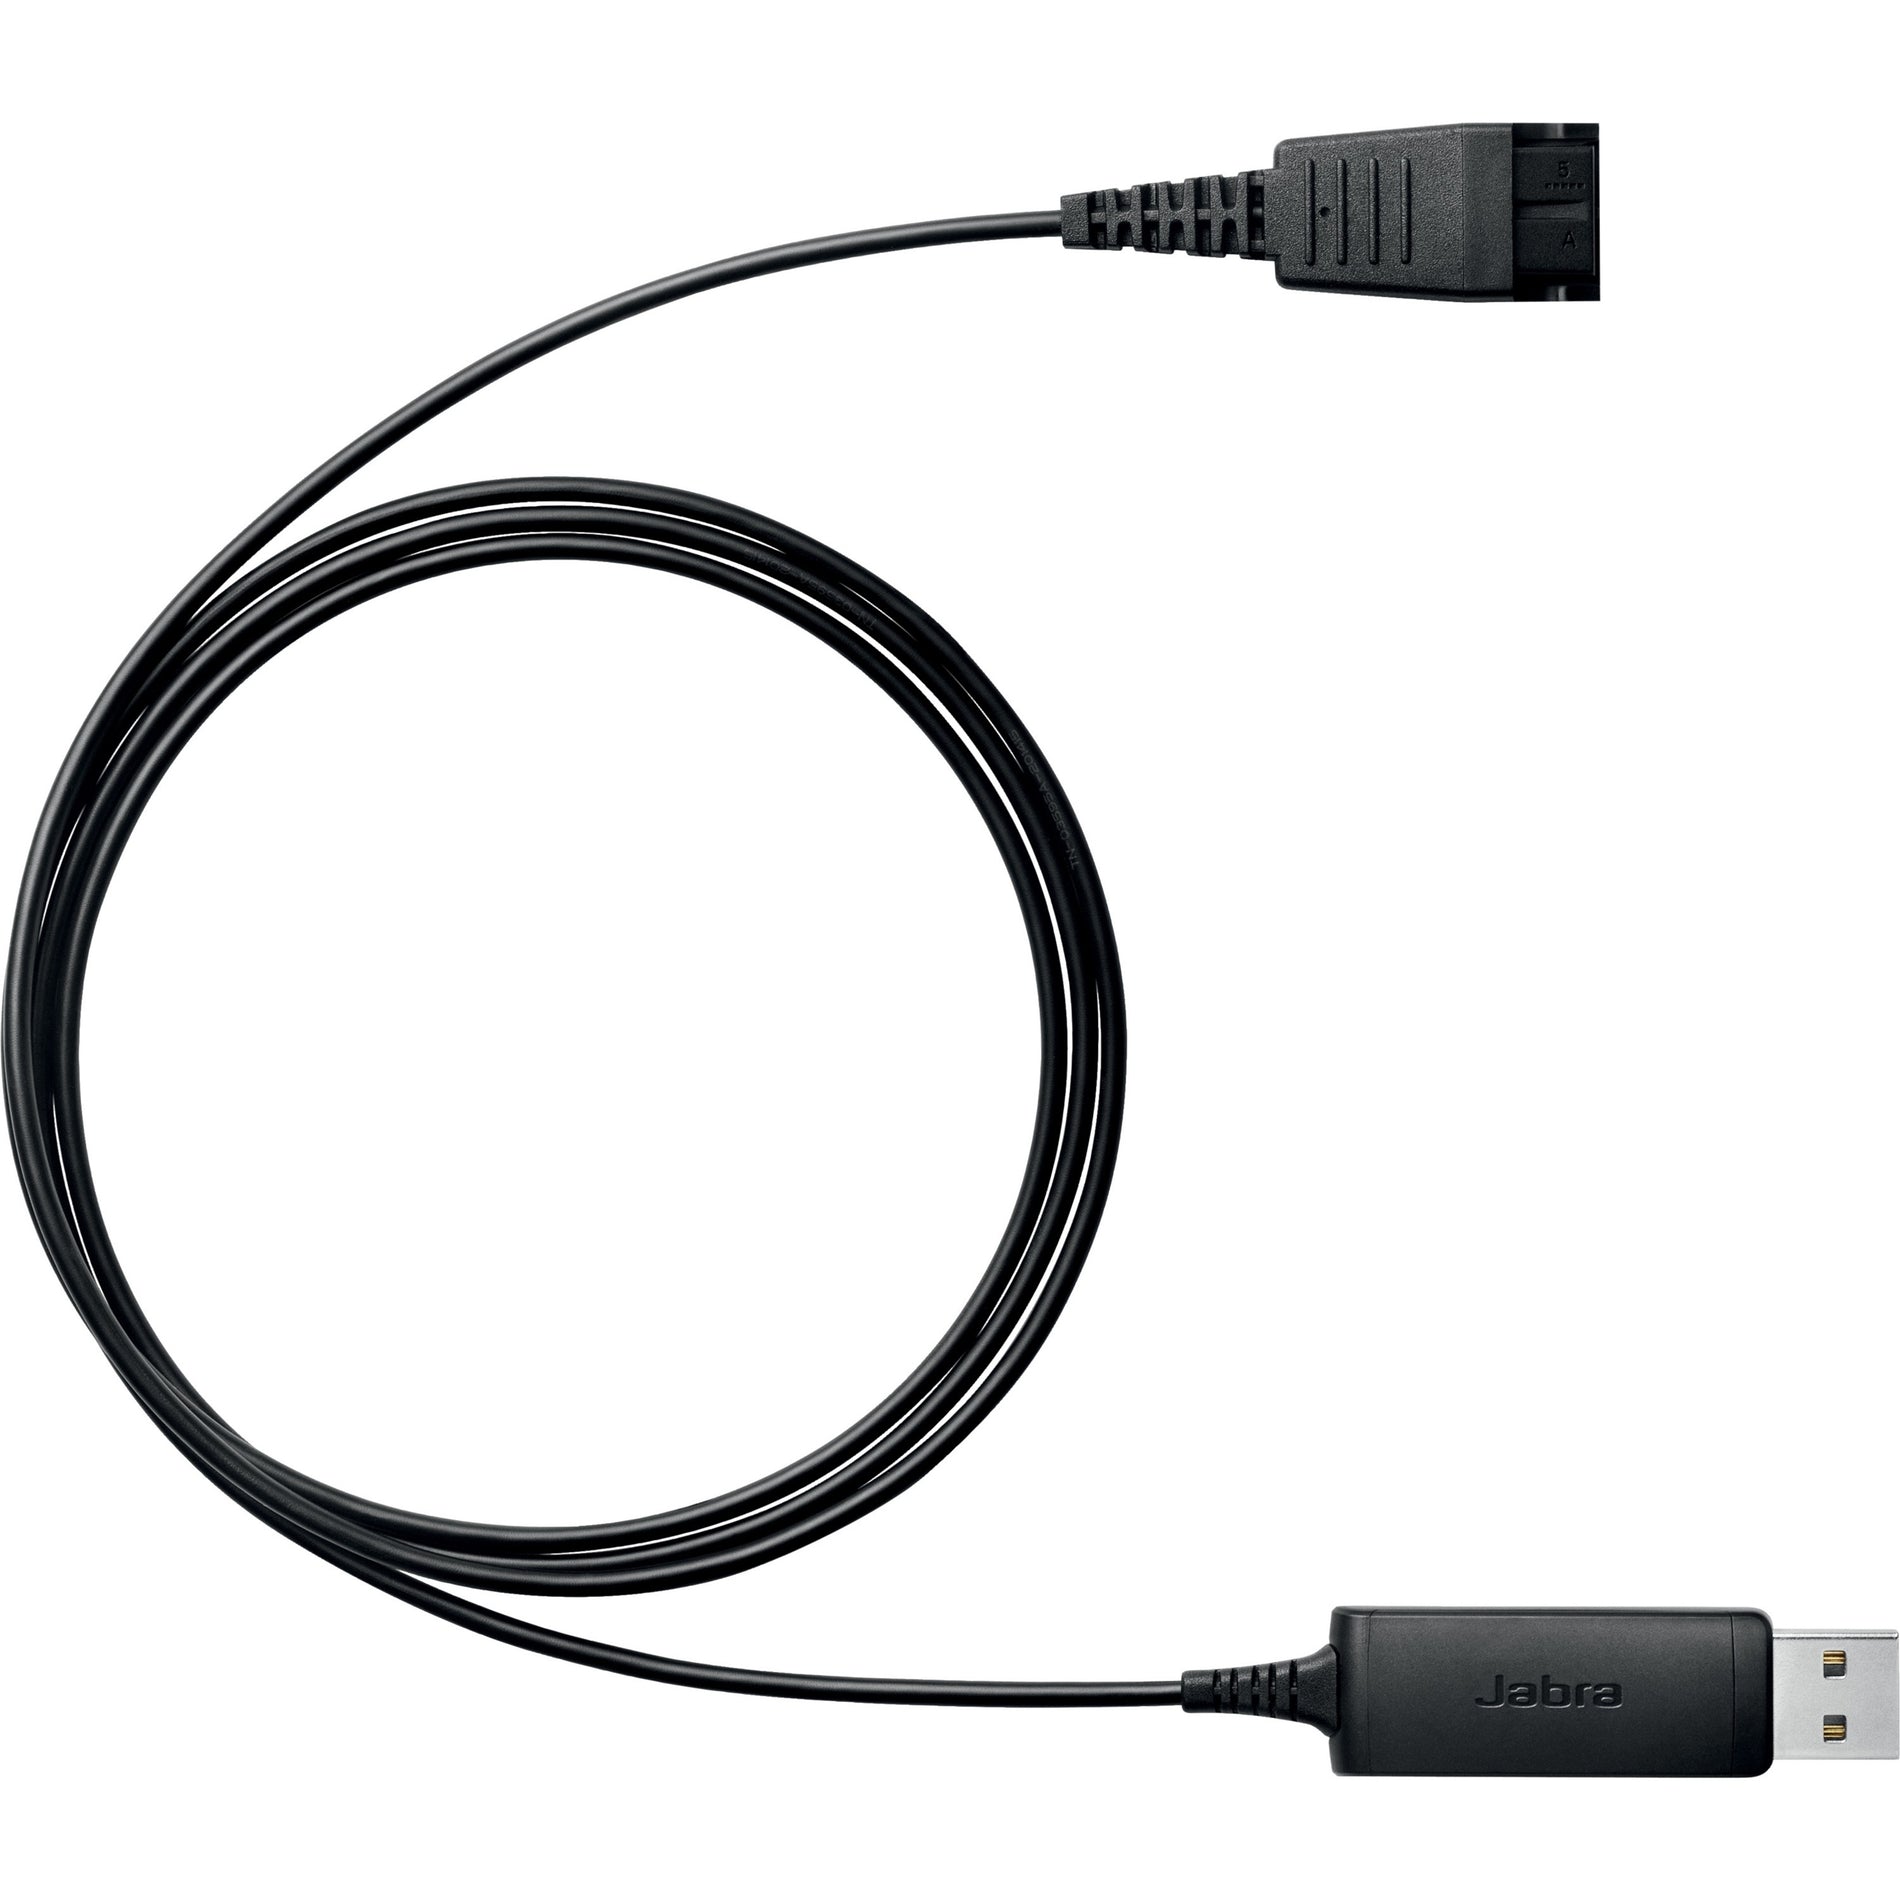 Jabra 230-09 LINK 230 USB Adapter, Quick Disconnect/USB Audio Cable, Shock Proof, Black